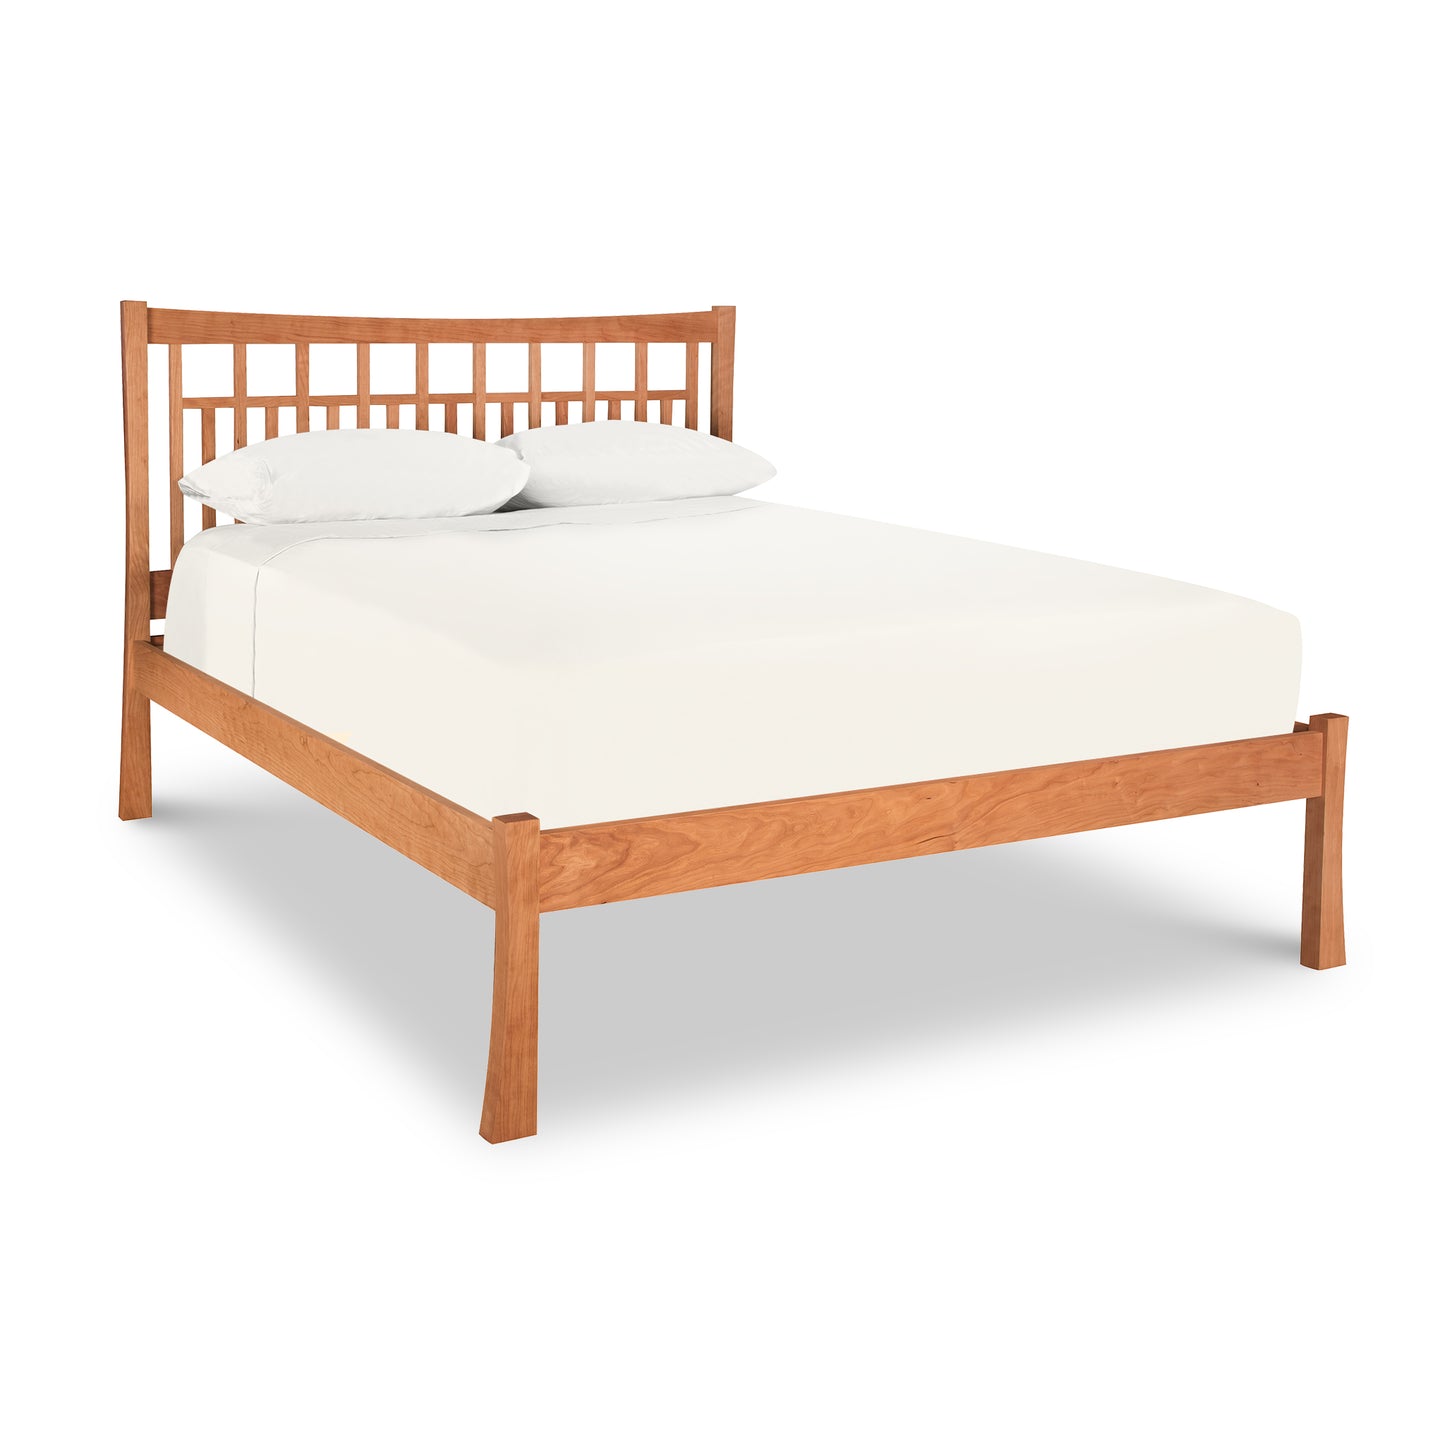 A solid wood frame Vermont Furniture Designs Contemporary Craftsman Low Footboard Platform Bed with a white mattress and two pillows, all enhanced by an eco-friendly oil finish and set against a white background.